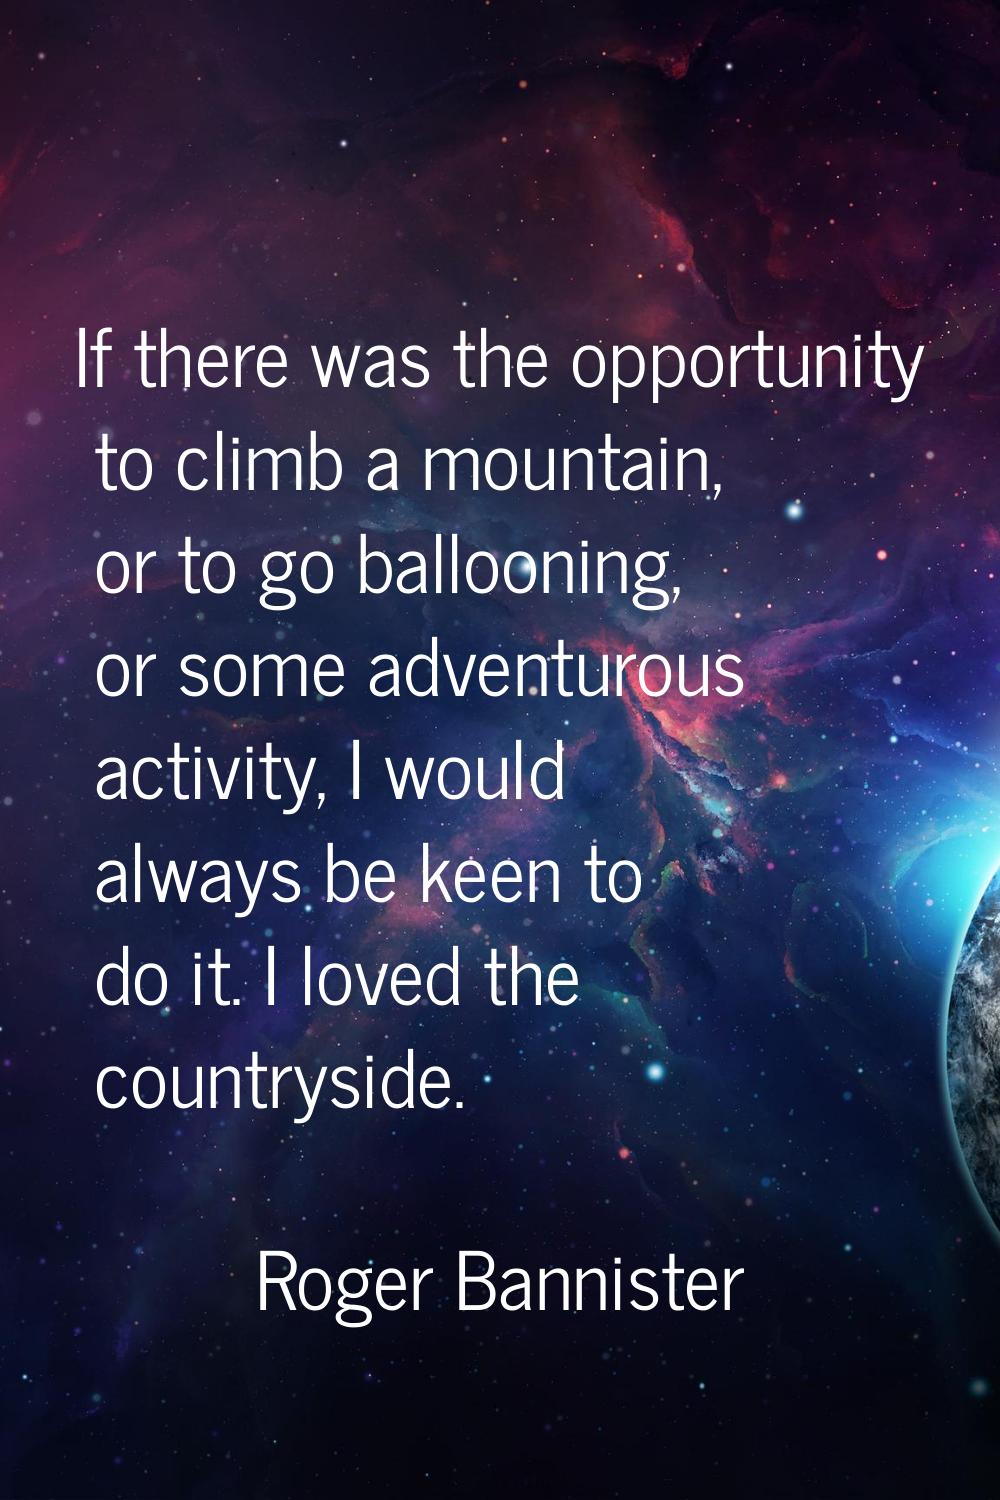 If there was the opportunity to climb a mountain, or to go ballooning, or some adventurous activity